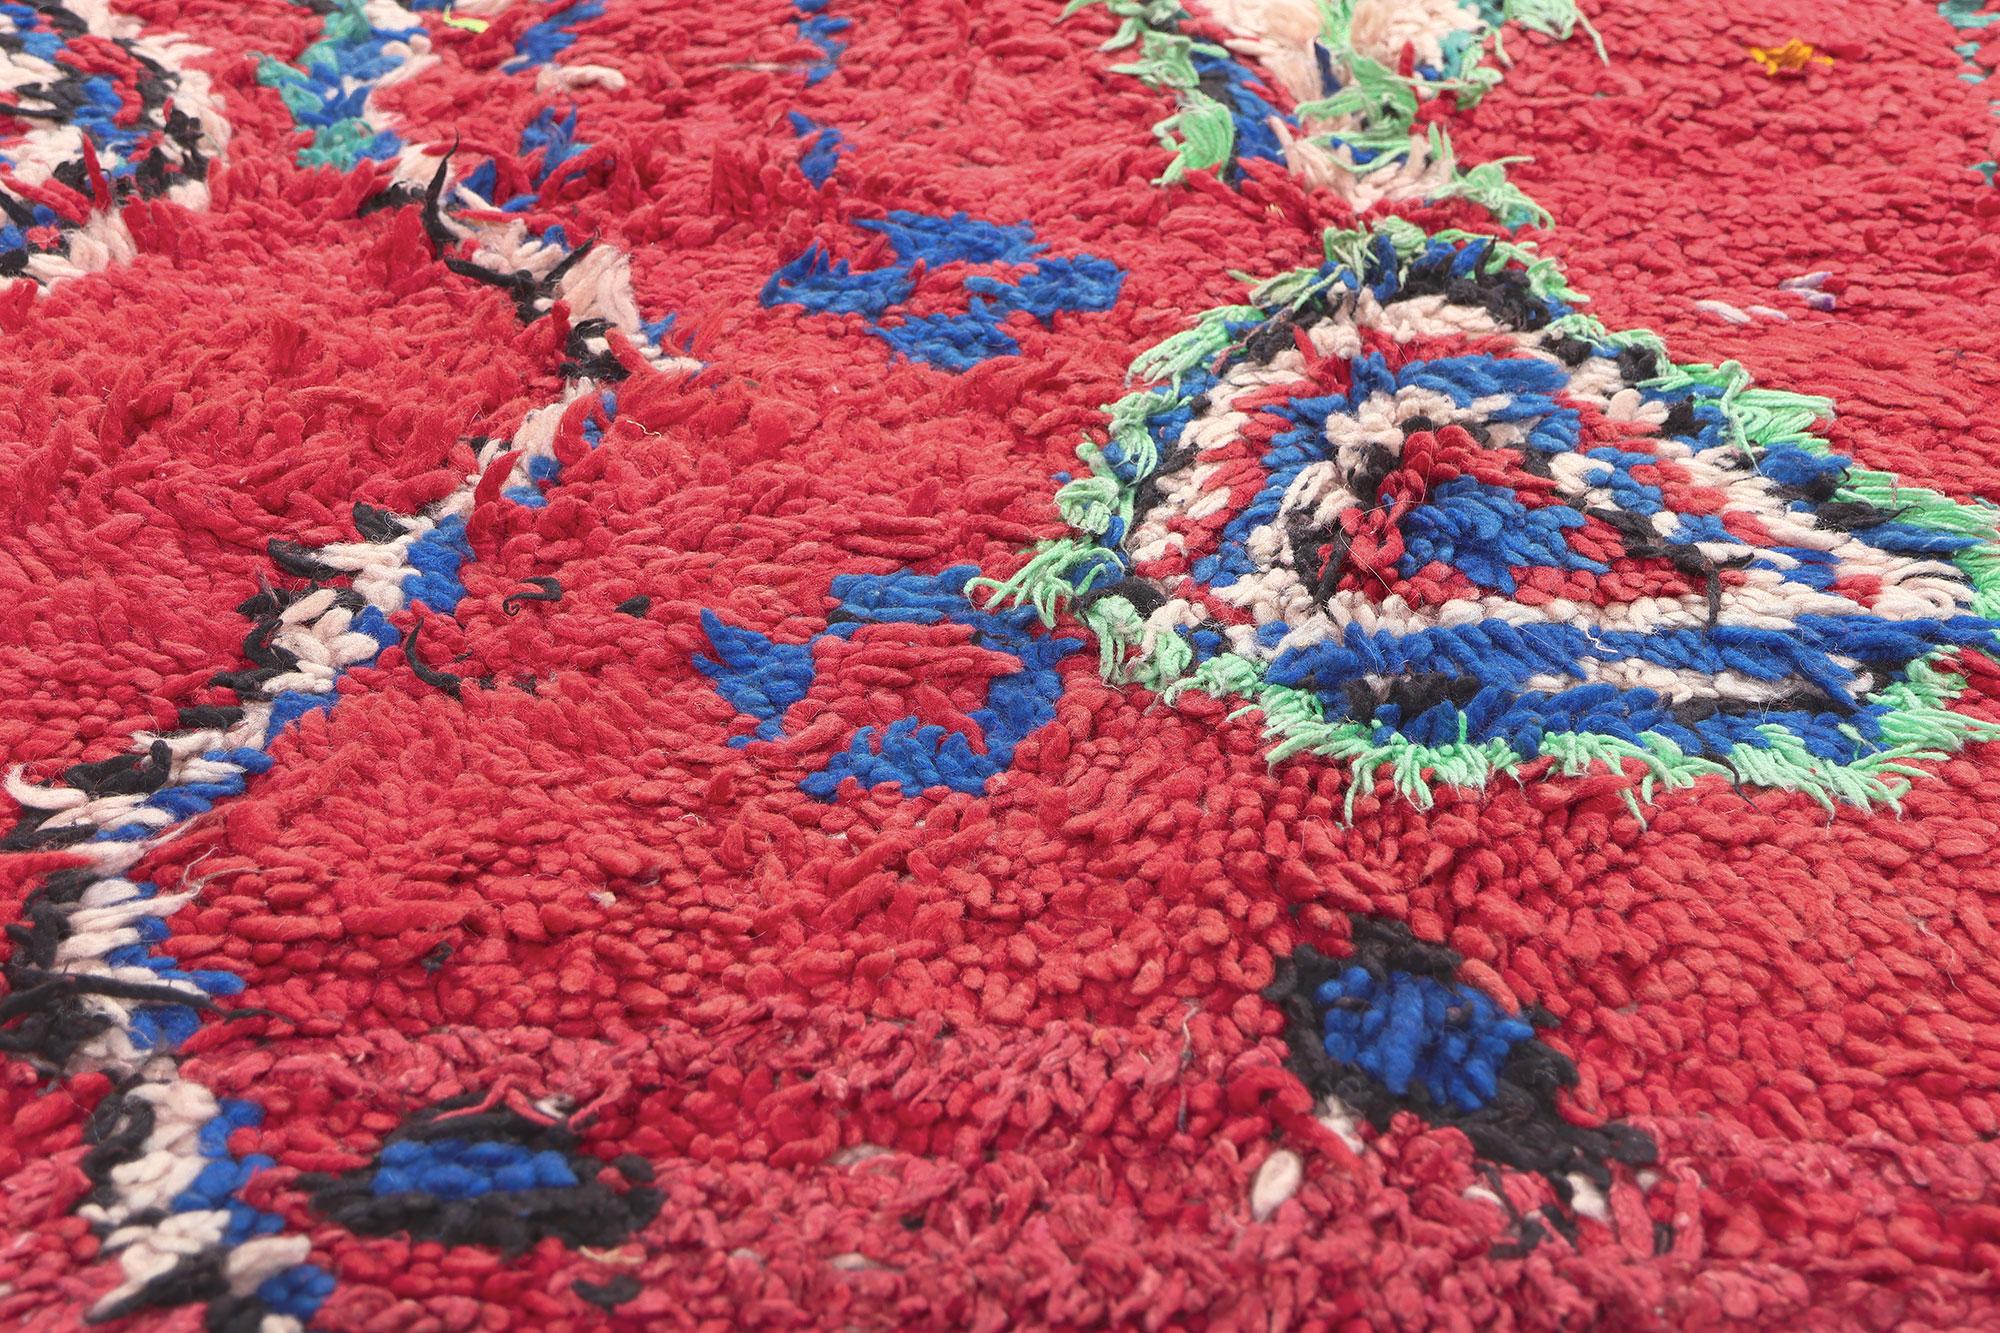 Vintage Red Boujad Moroccan Rug, Boho Jungalow Meets Nomadic Charm In Good Condition For Sale In Dallas, TX